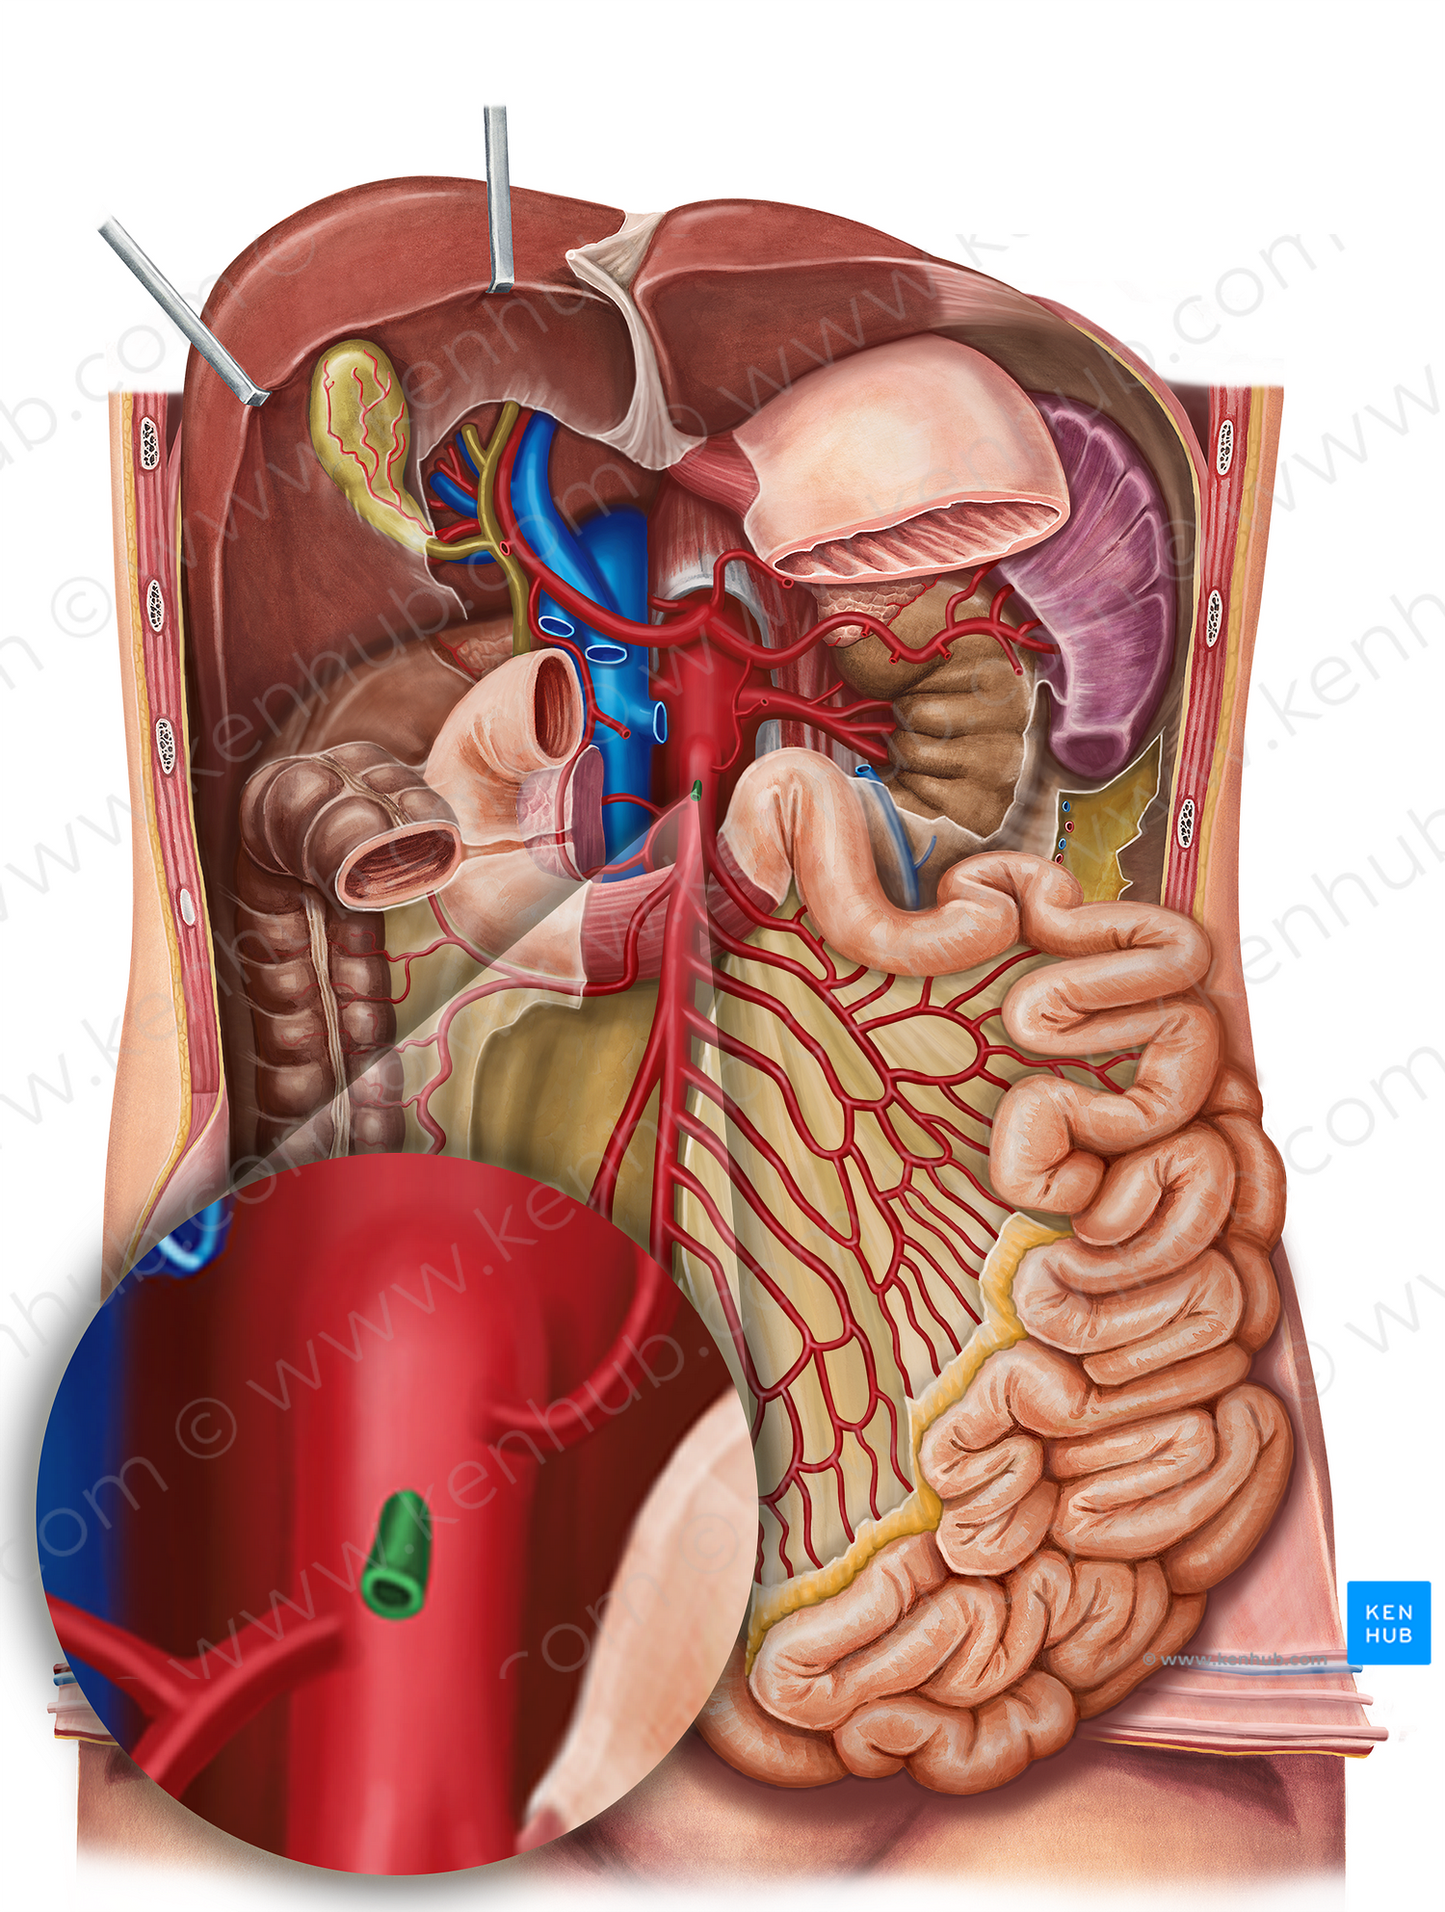 Middle colic artery (#1053)